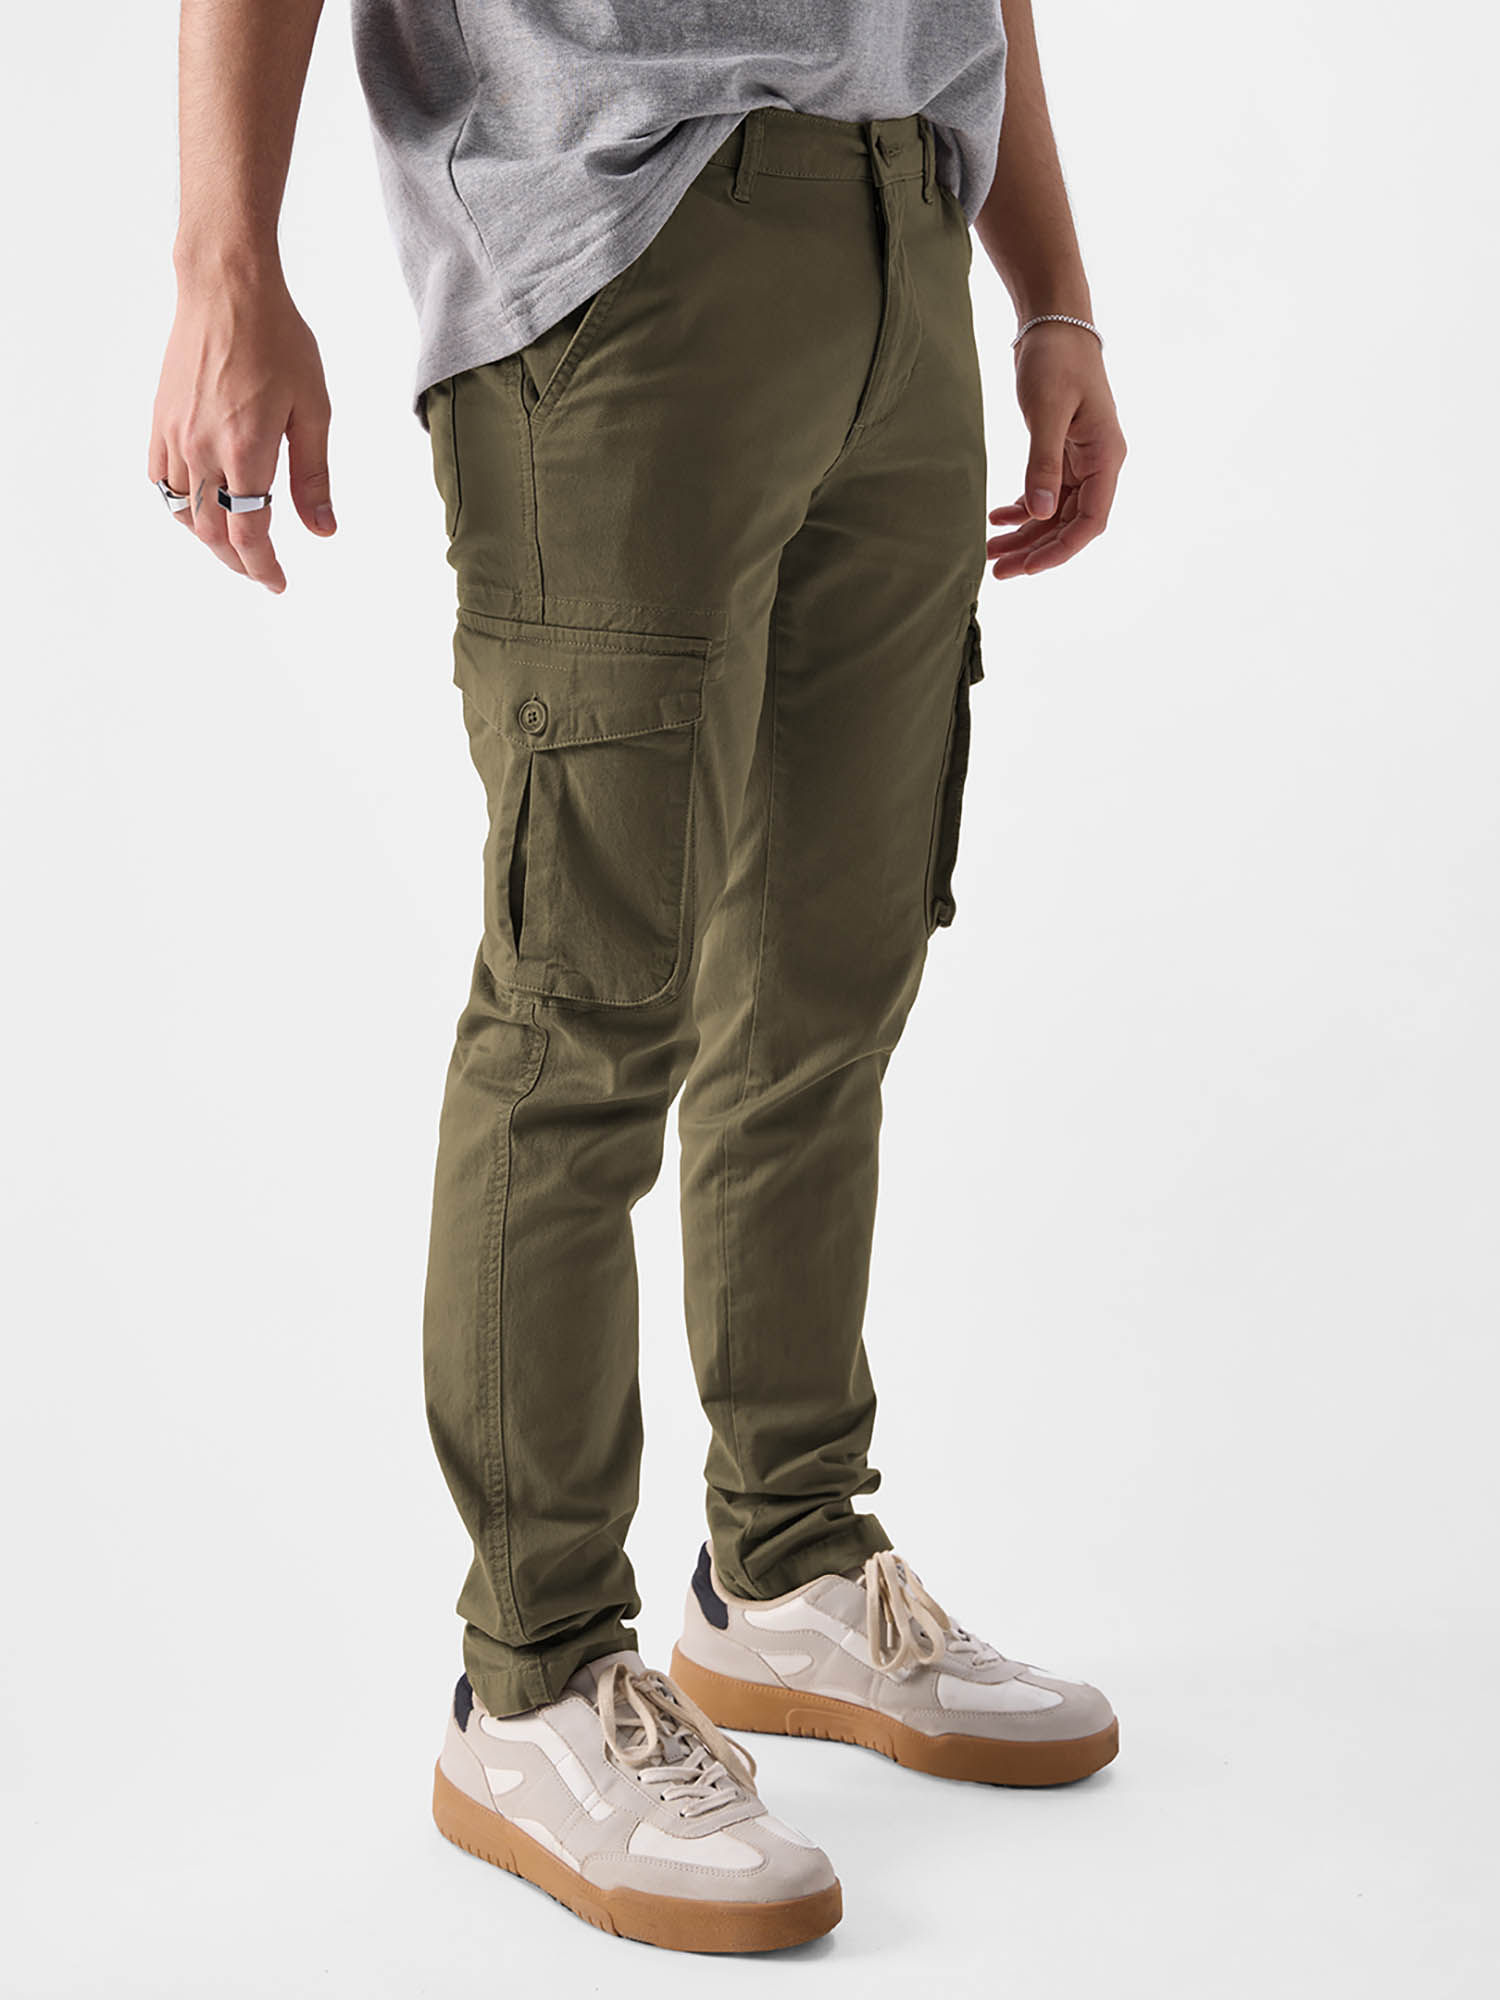 Mens Military Cargo Pants 100% Cotton, Stretchable, Flexible, With Multiple  Pockets Casual Army Trousers Mens For Combat, SWAT, And Army Available In  Plus Sizes 28 40 211110 From Kong00, $15.48 | DHgate.Com